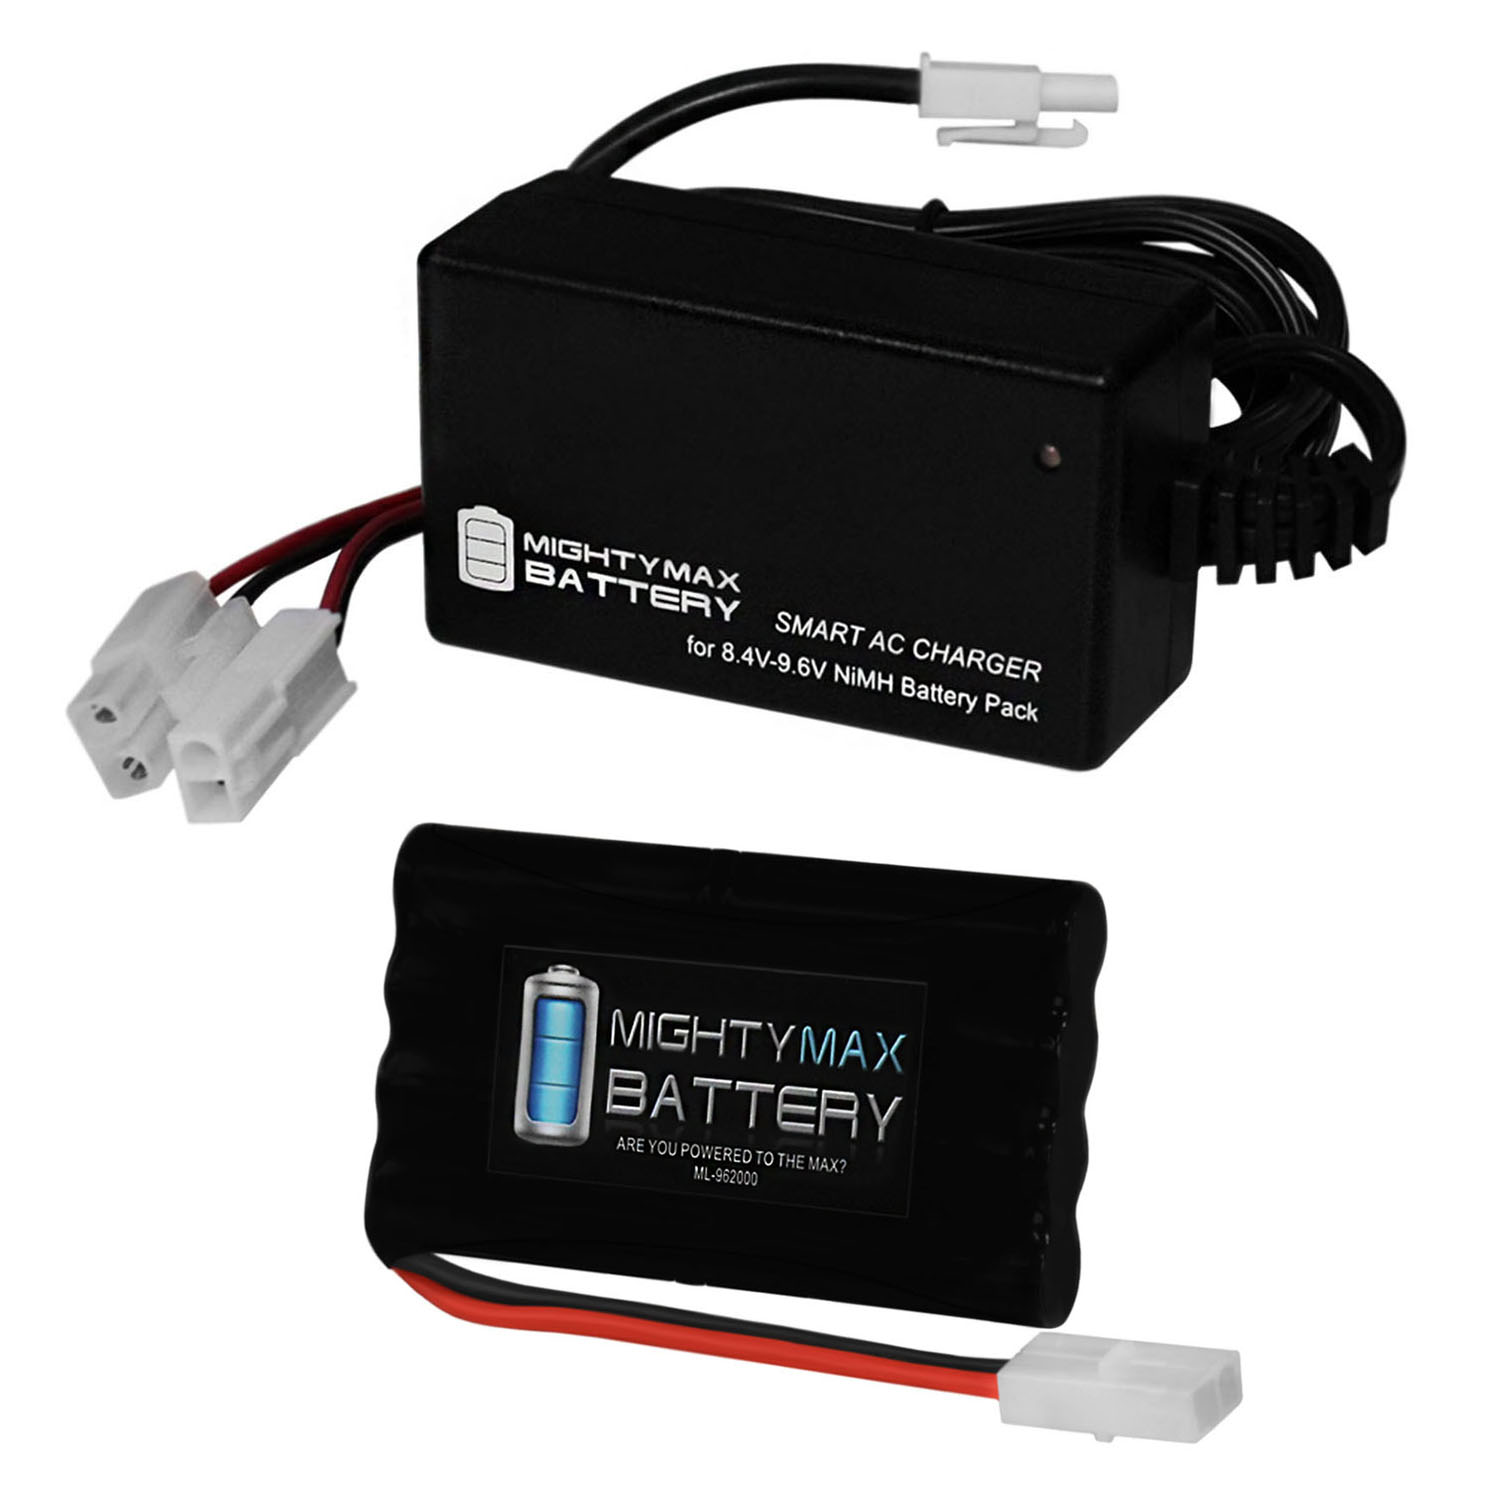 9.6V 2000Mah NiMh Battery For Toy RC Car #11401-01 + Smart Charger